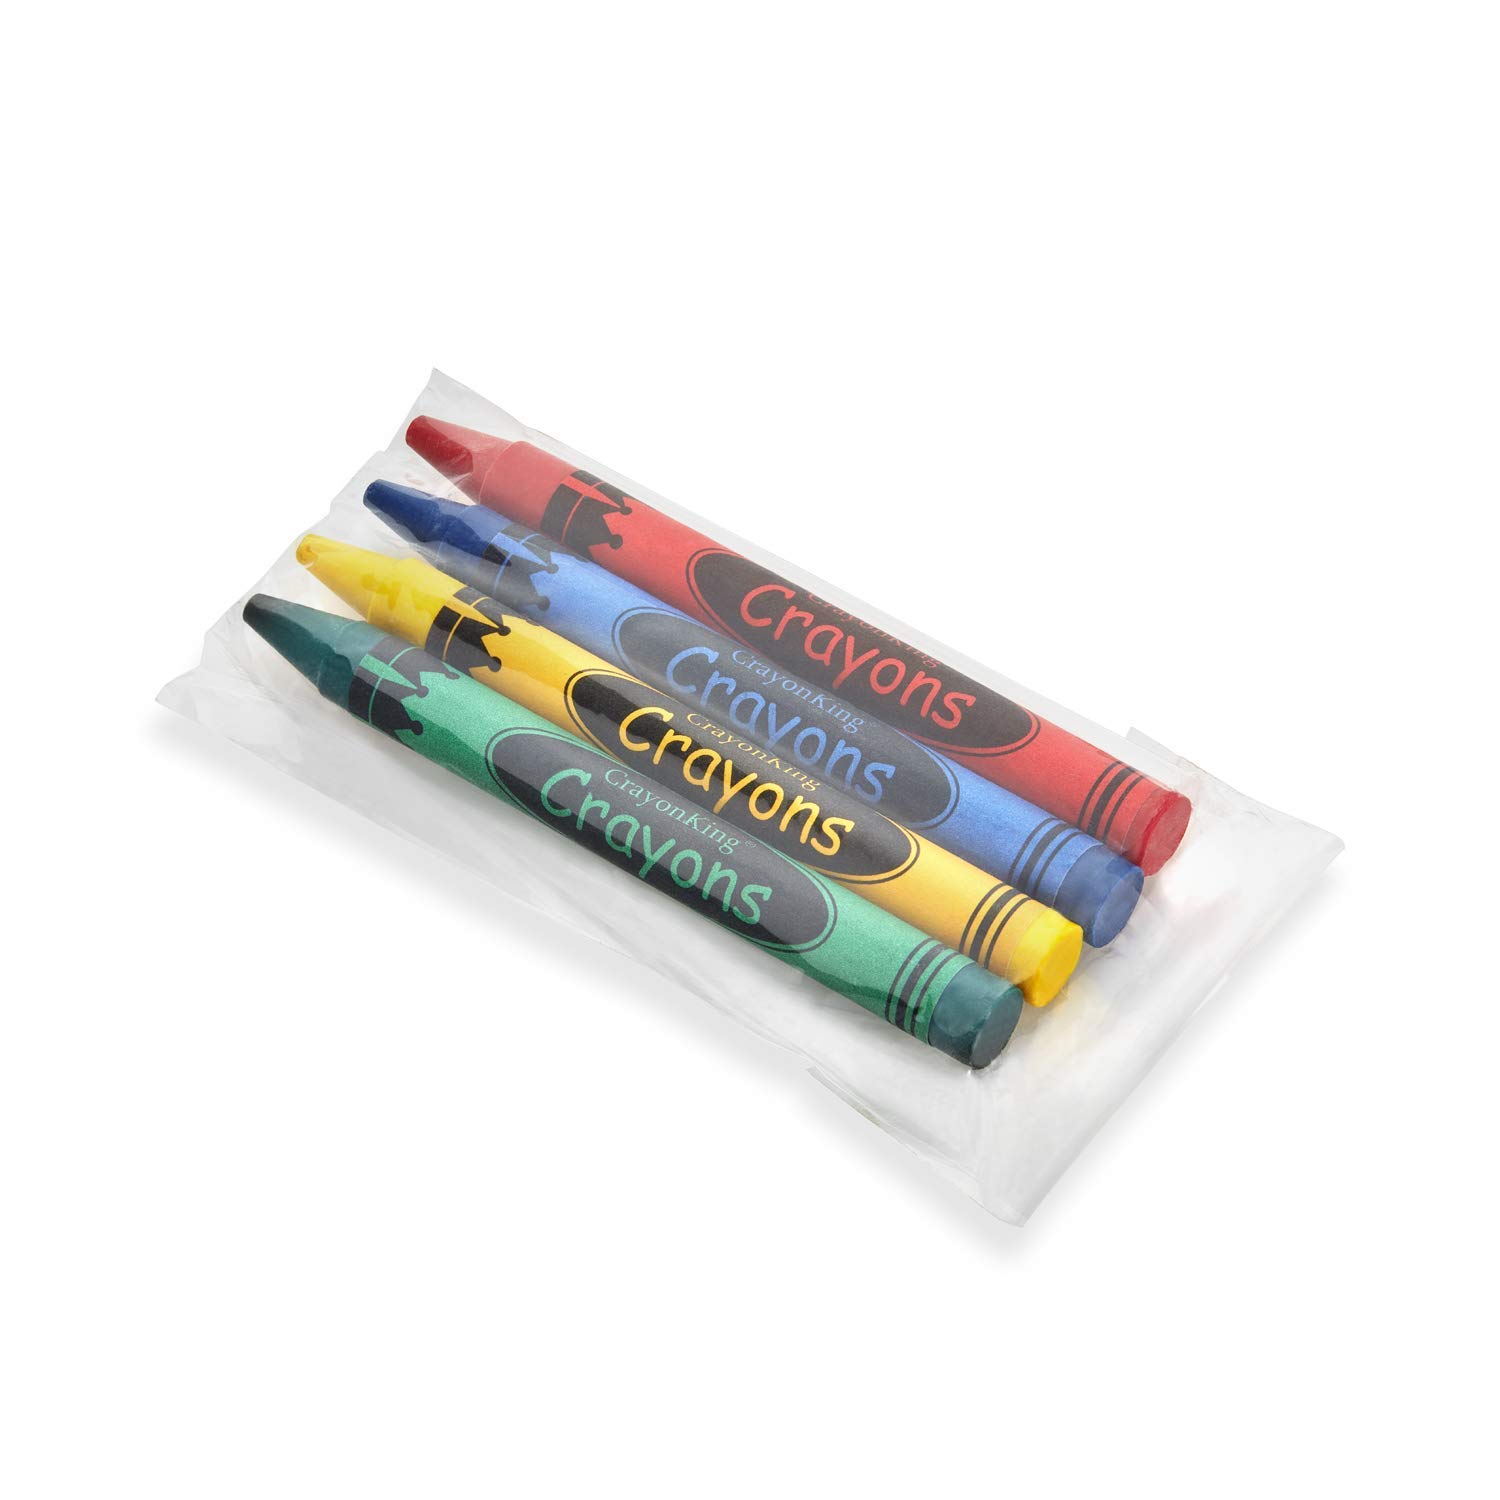 CrayonKing 500 Sets of 4-Pack in Cello (2,000 total bulk crayons) Restaurants, Party Favors, Birthdays, School Teachers & Kids Coloring Non-Toxic Crayons